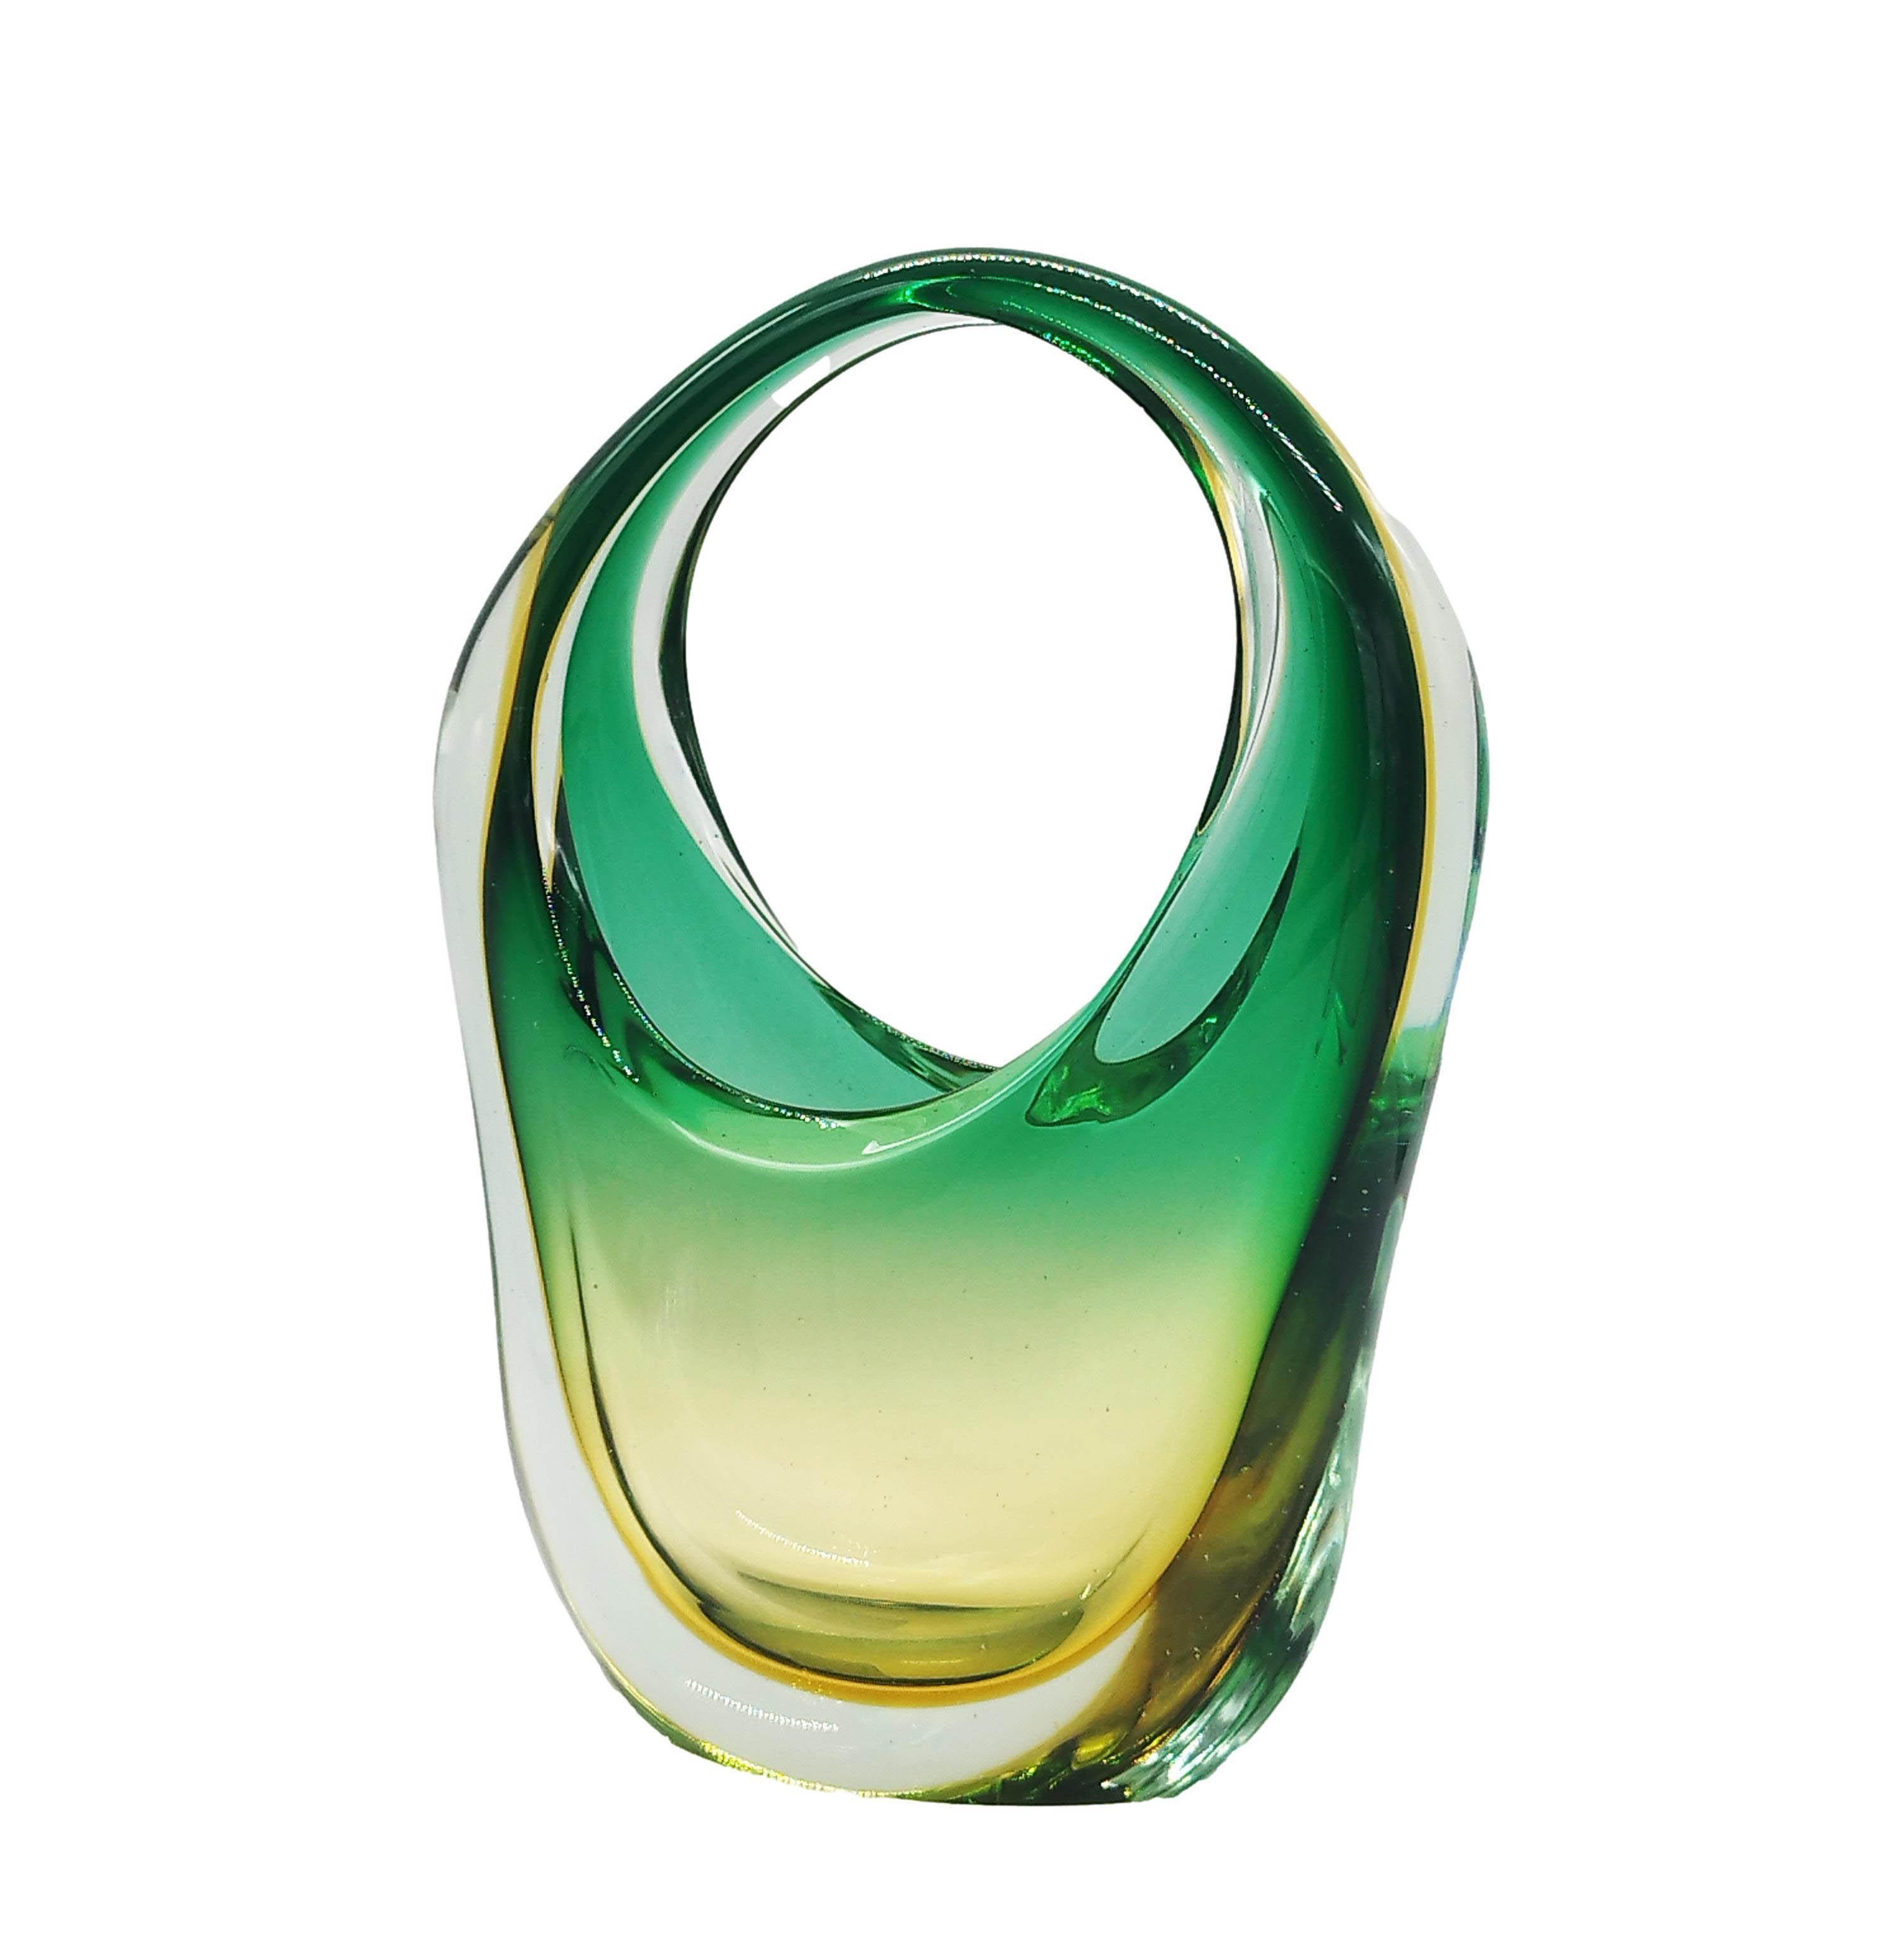 Green and amber submerged glass centrepiece with ring-shaped handle, late 1960s
Murano glass, Flavio Poli for Seguso